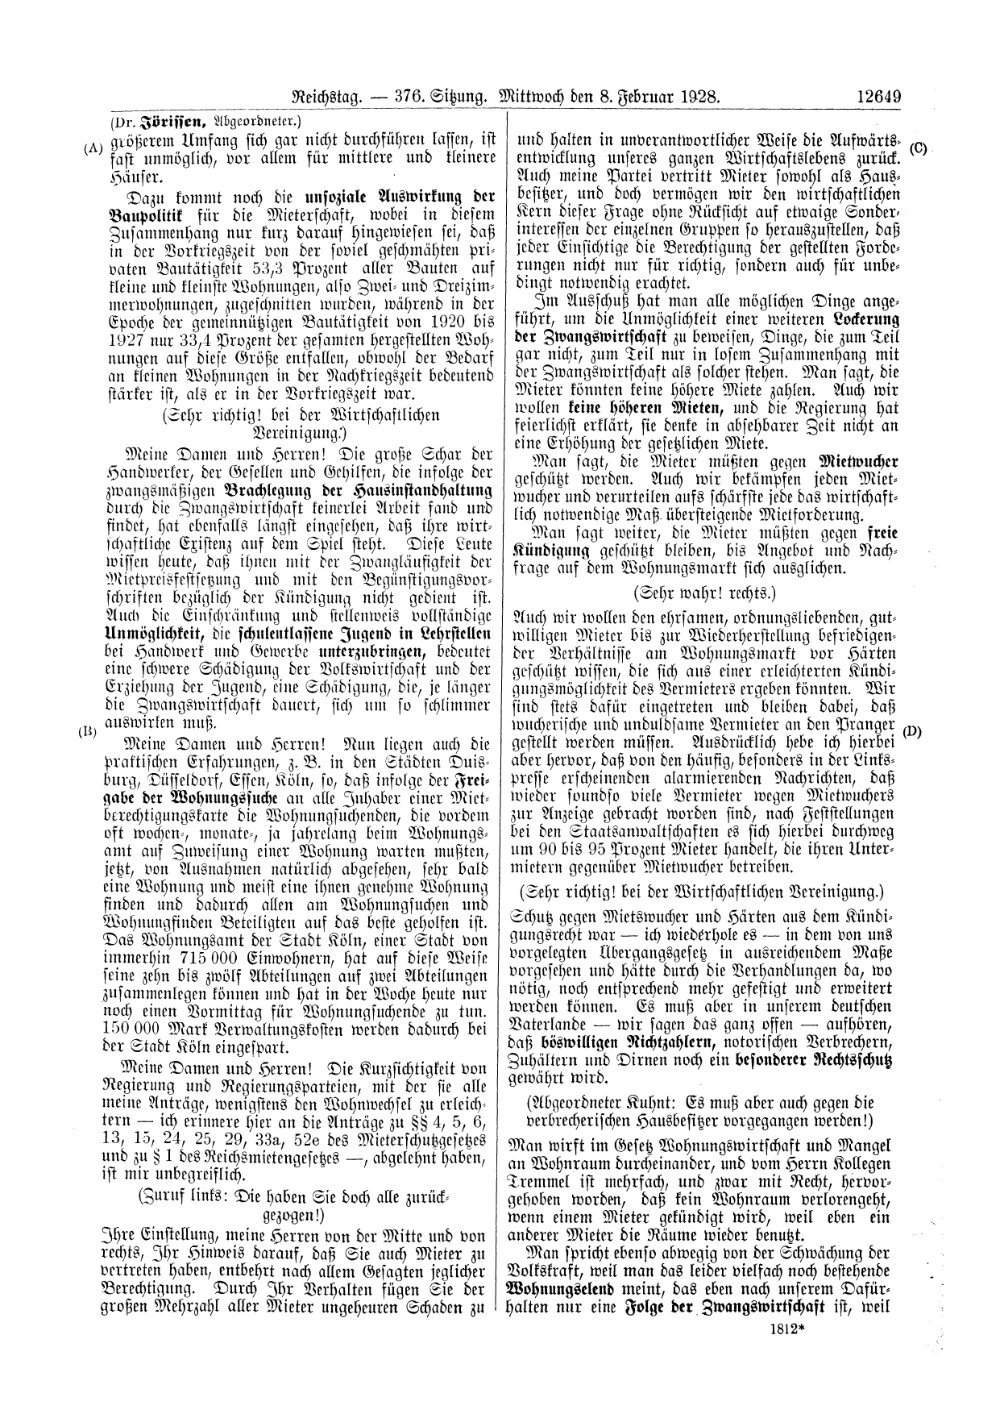 Scan of page 12649